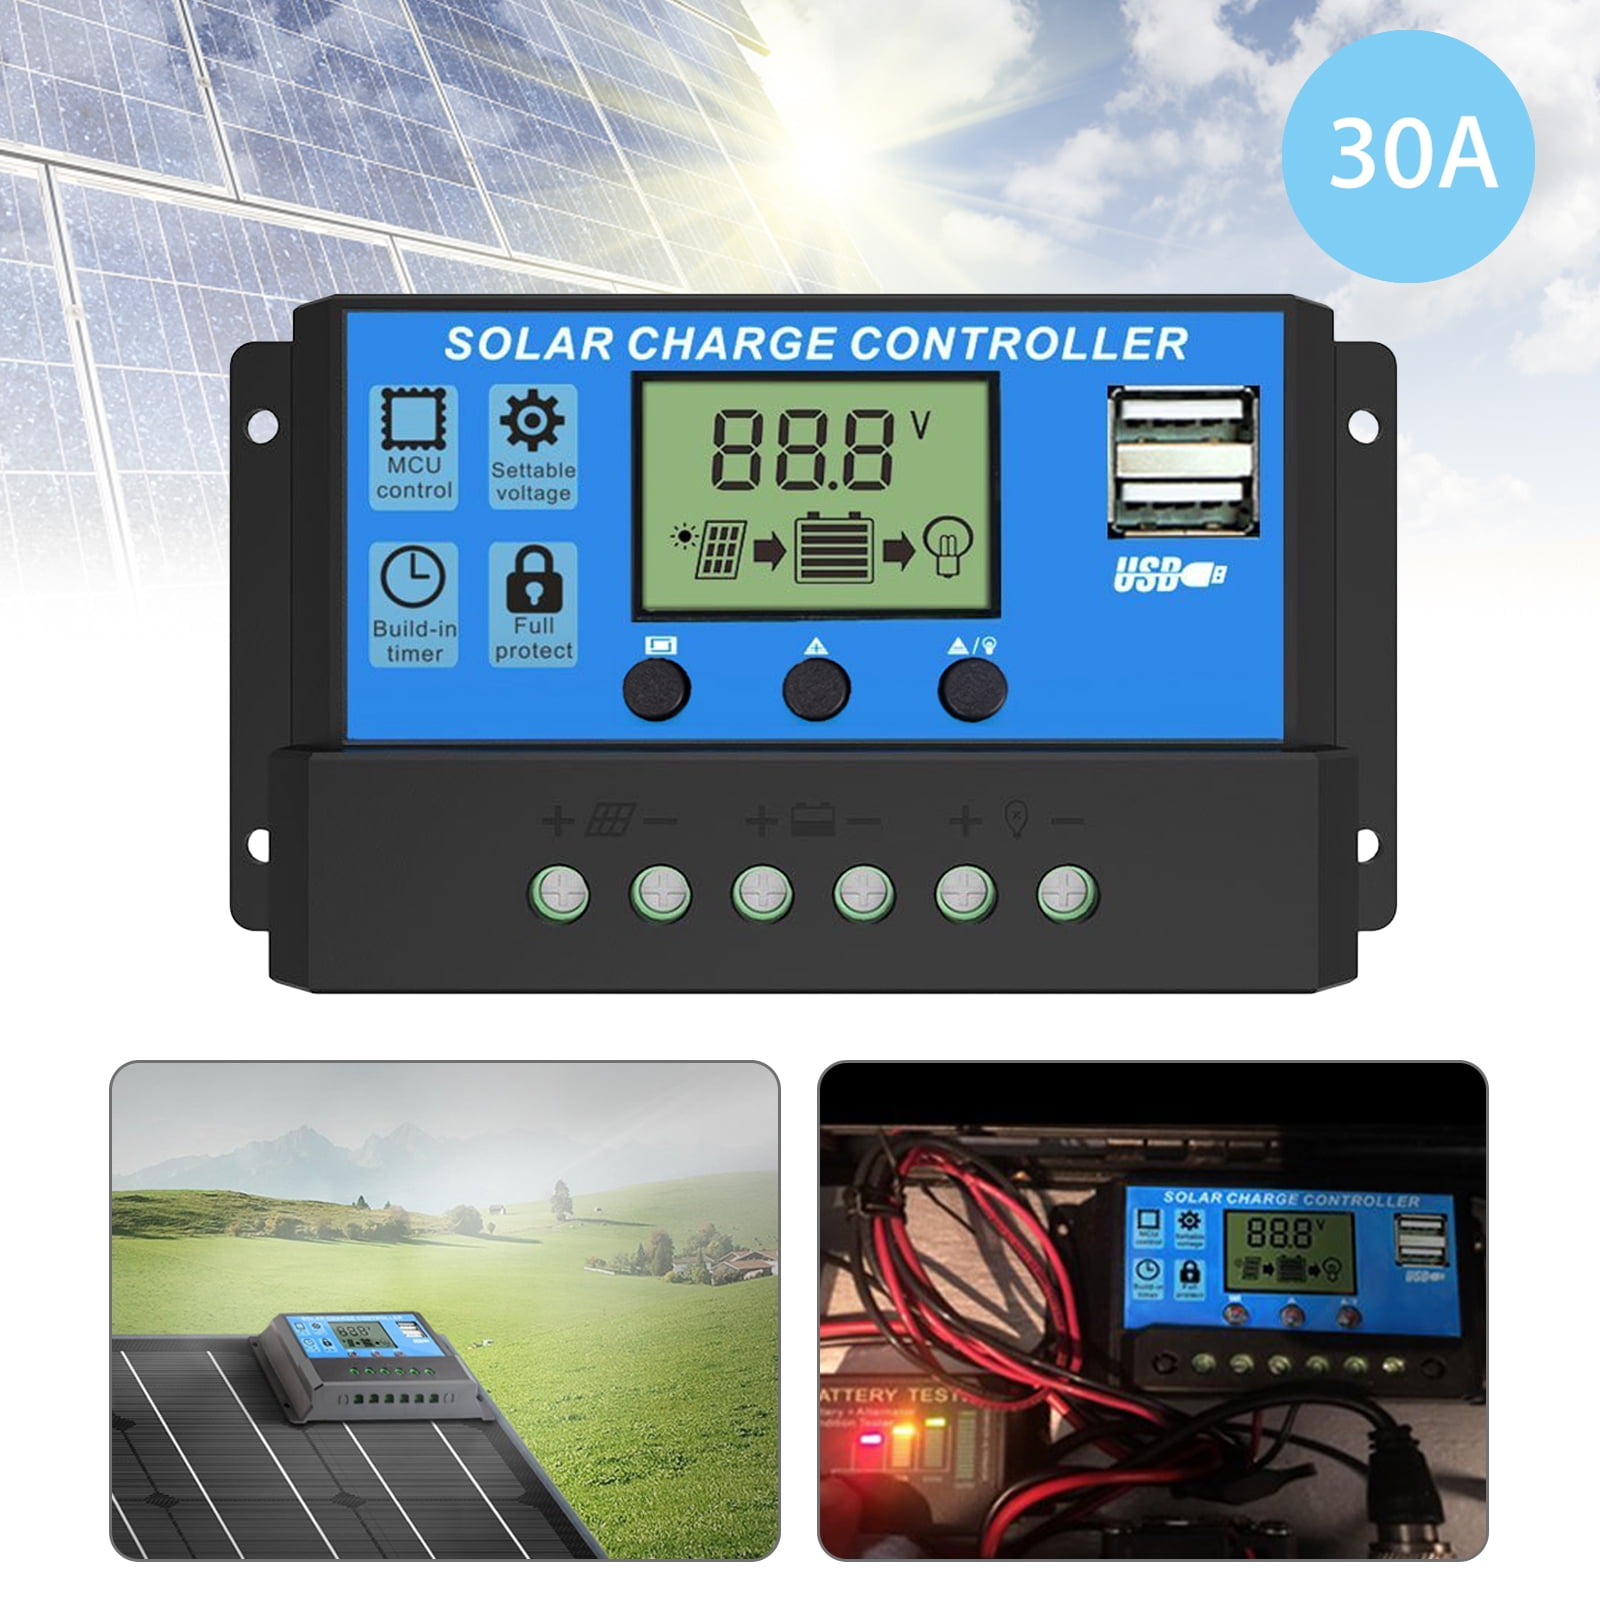 12V / 24V Auto-Select Intelligent Regulator USB Charge ExpertPower 20A PWM Solar Charge Controller for LifePO4 Battery Backlight LCD Display Max PV Input 55V